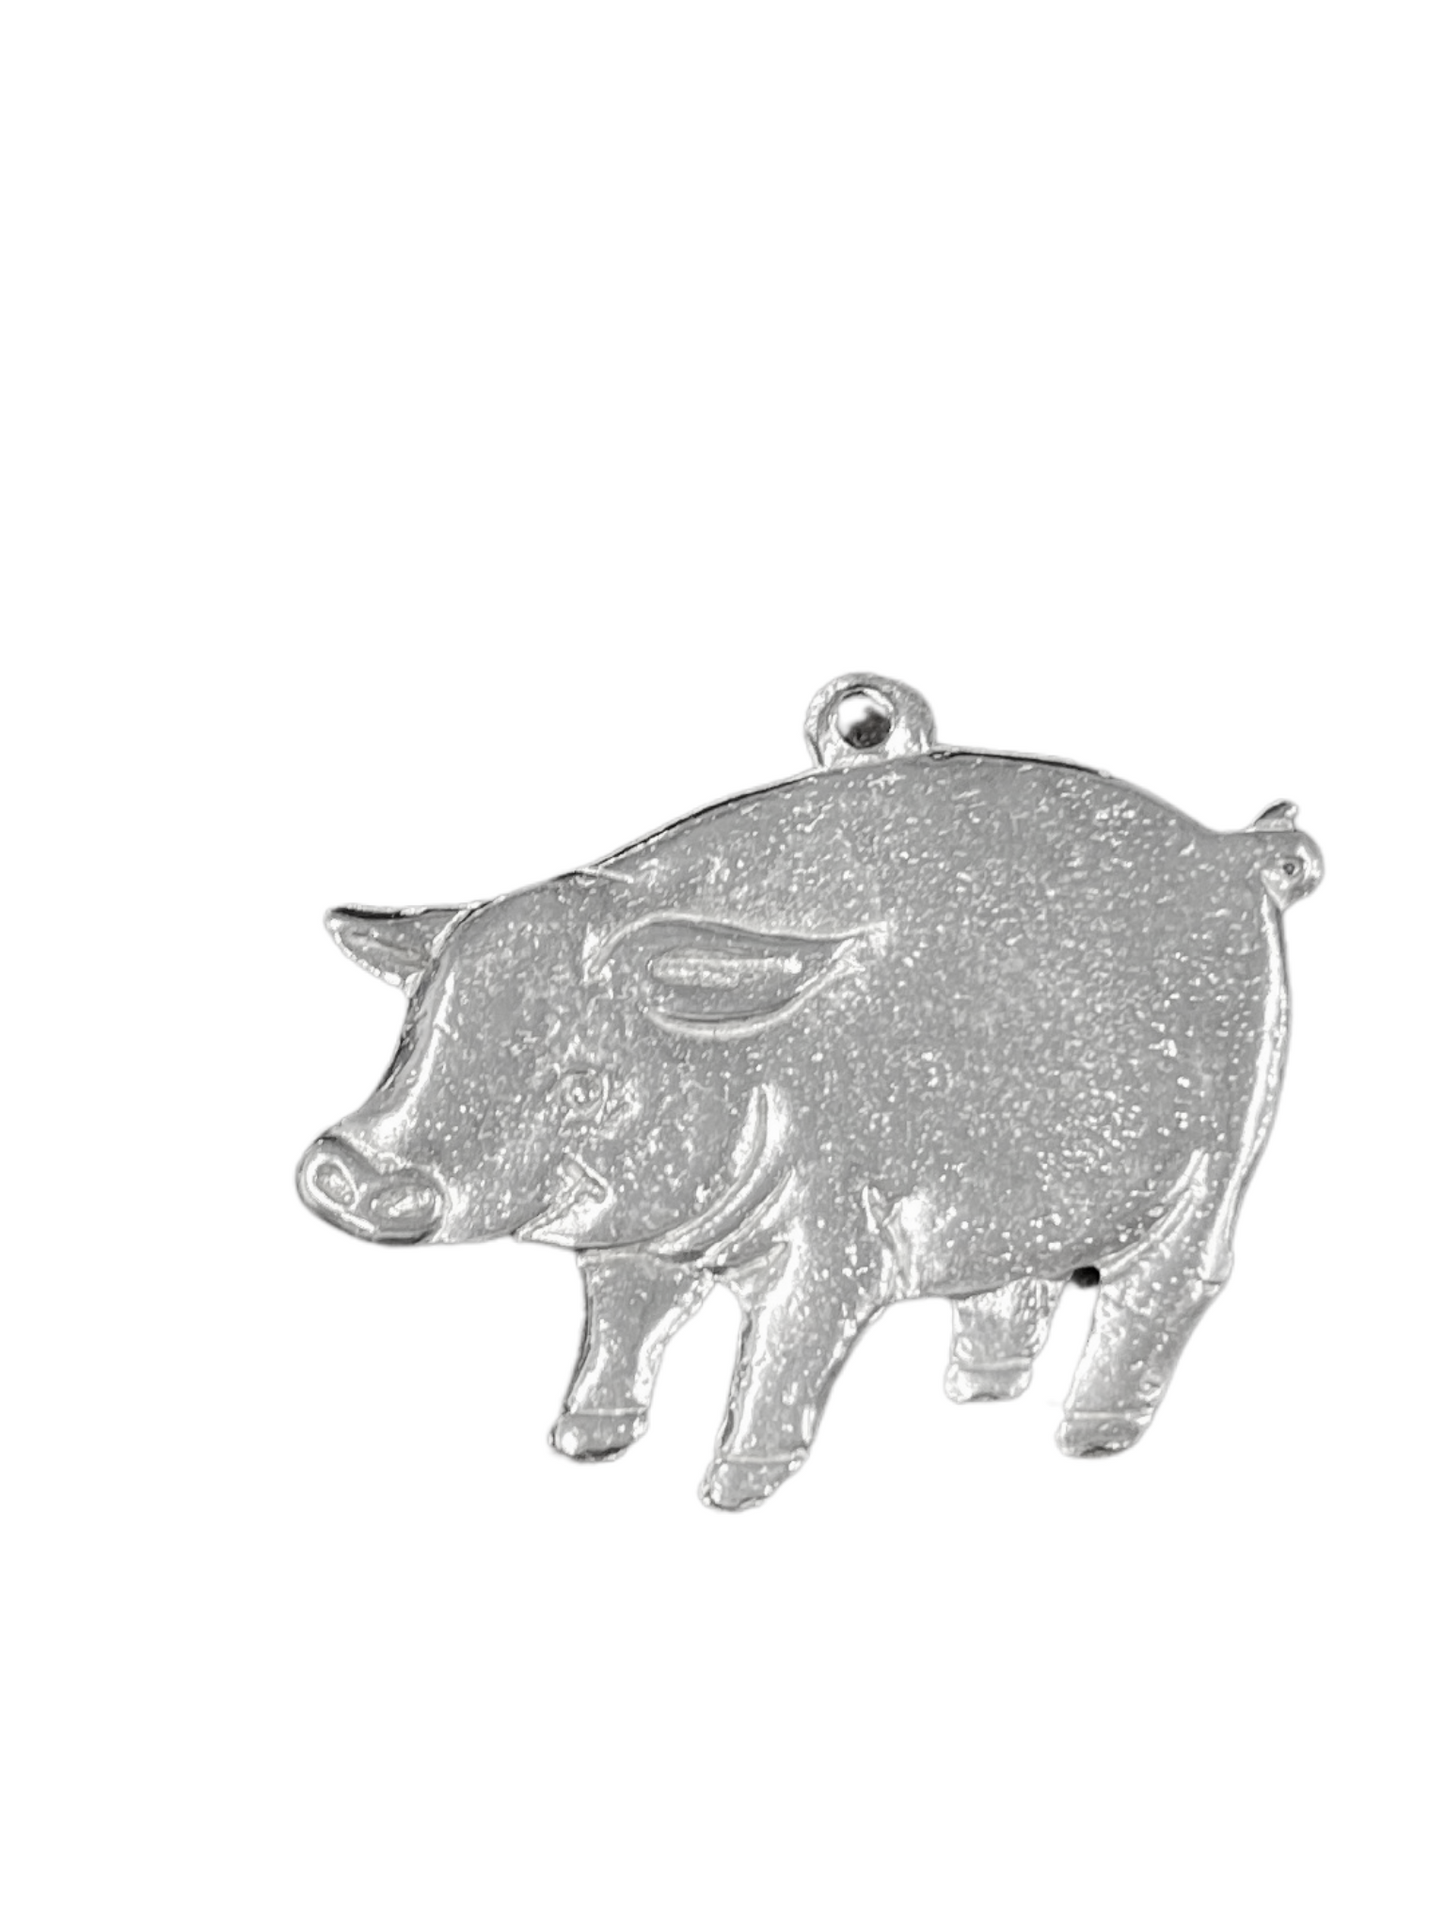 Pig Pendant Jewelry - Pendant Only or Necklace Set